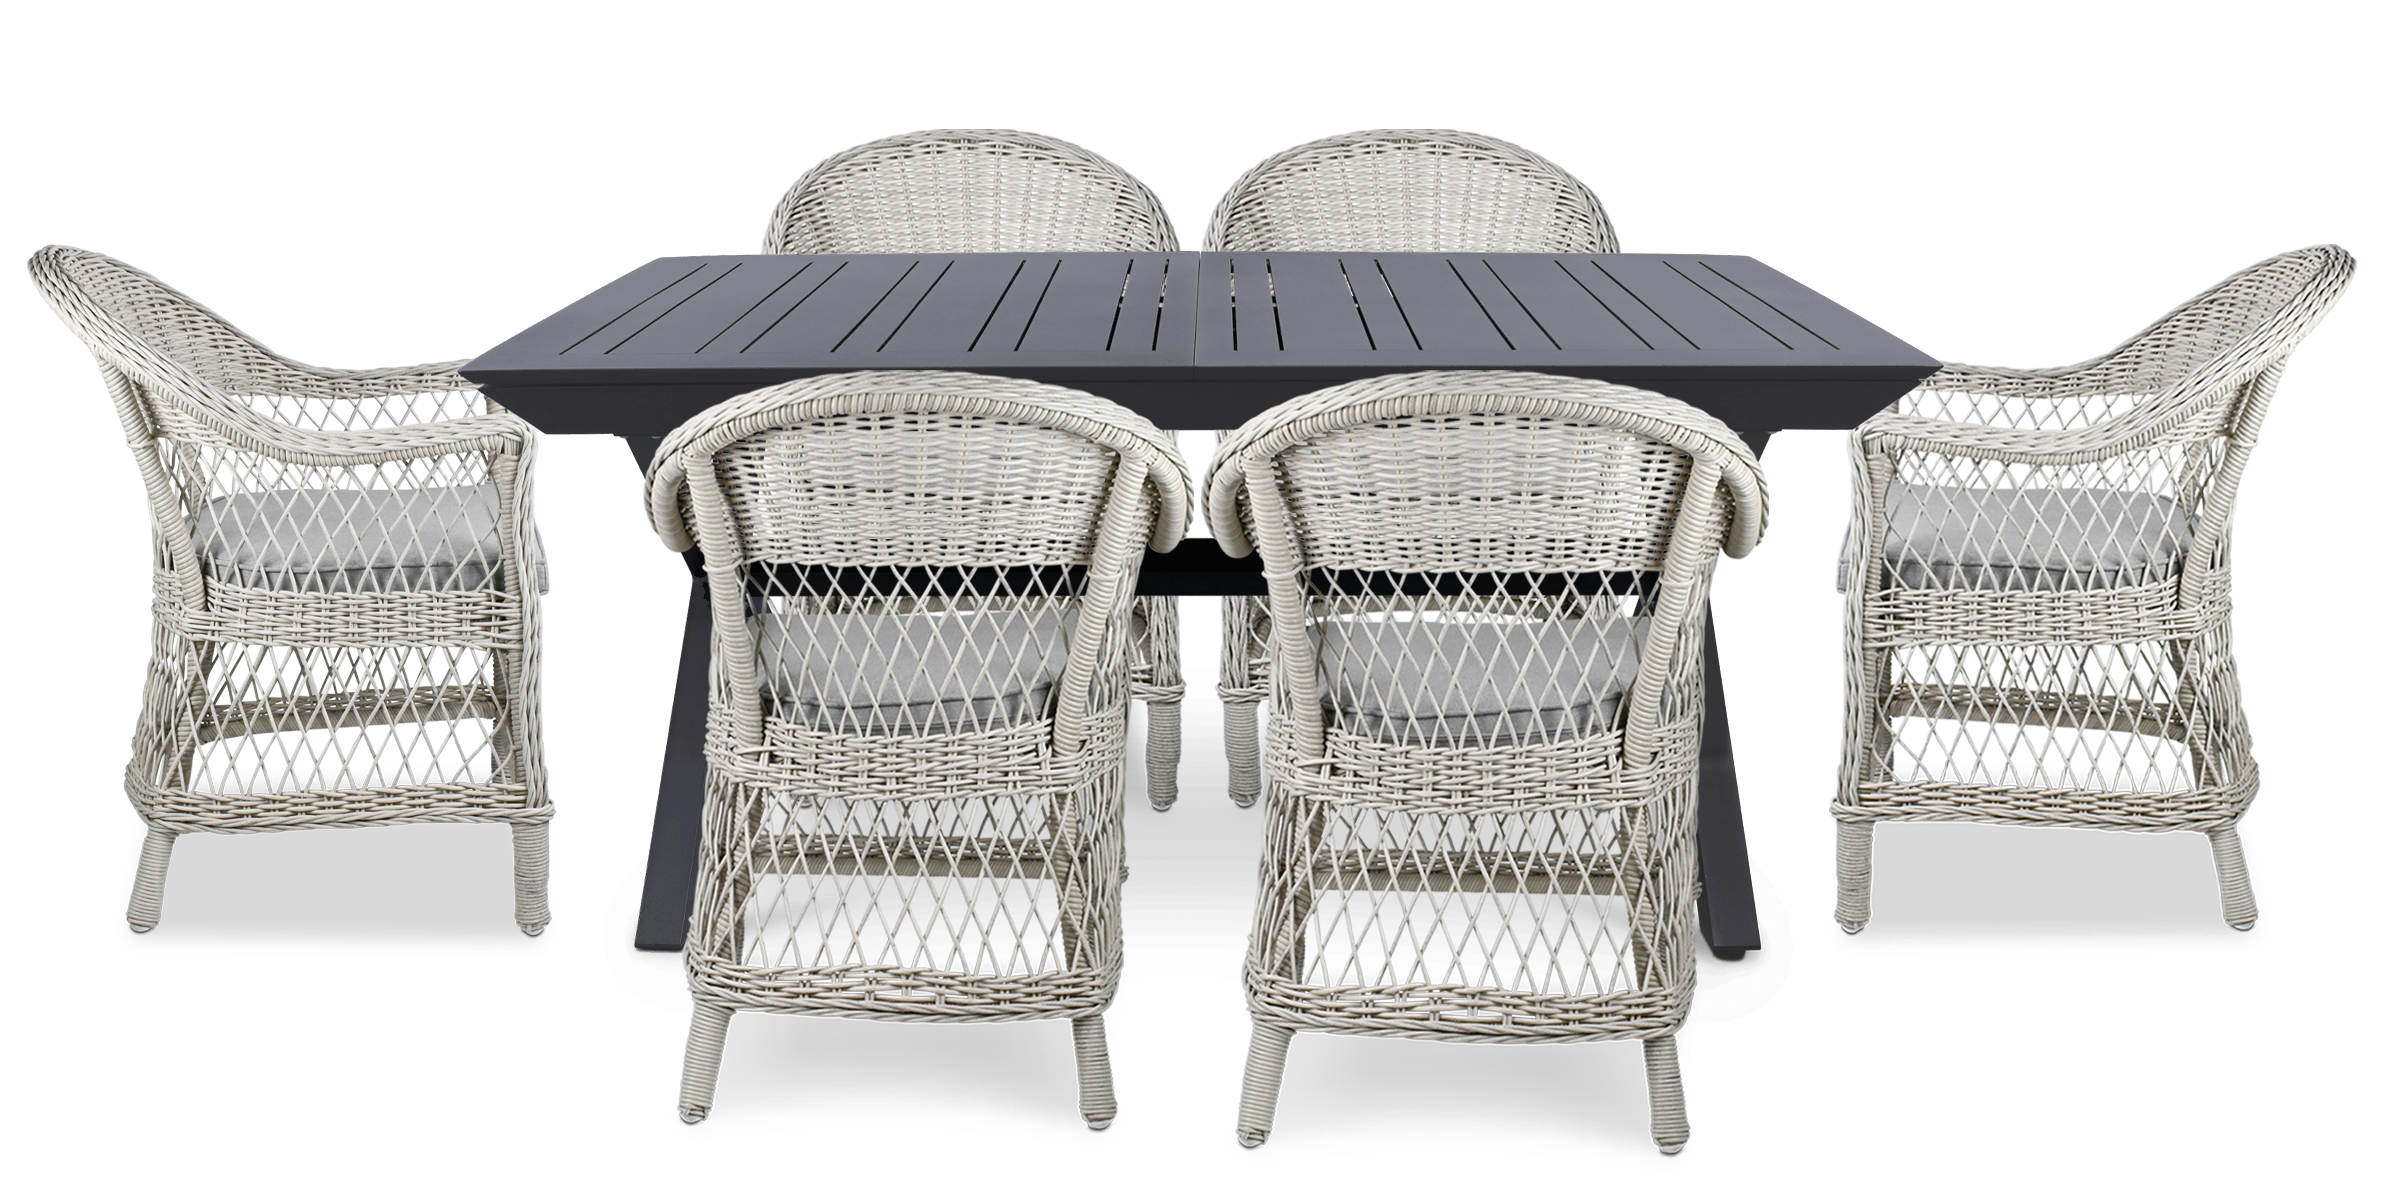 Caribbean Outdoor Extension Table in Gunmetal with Wicker Chairs